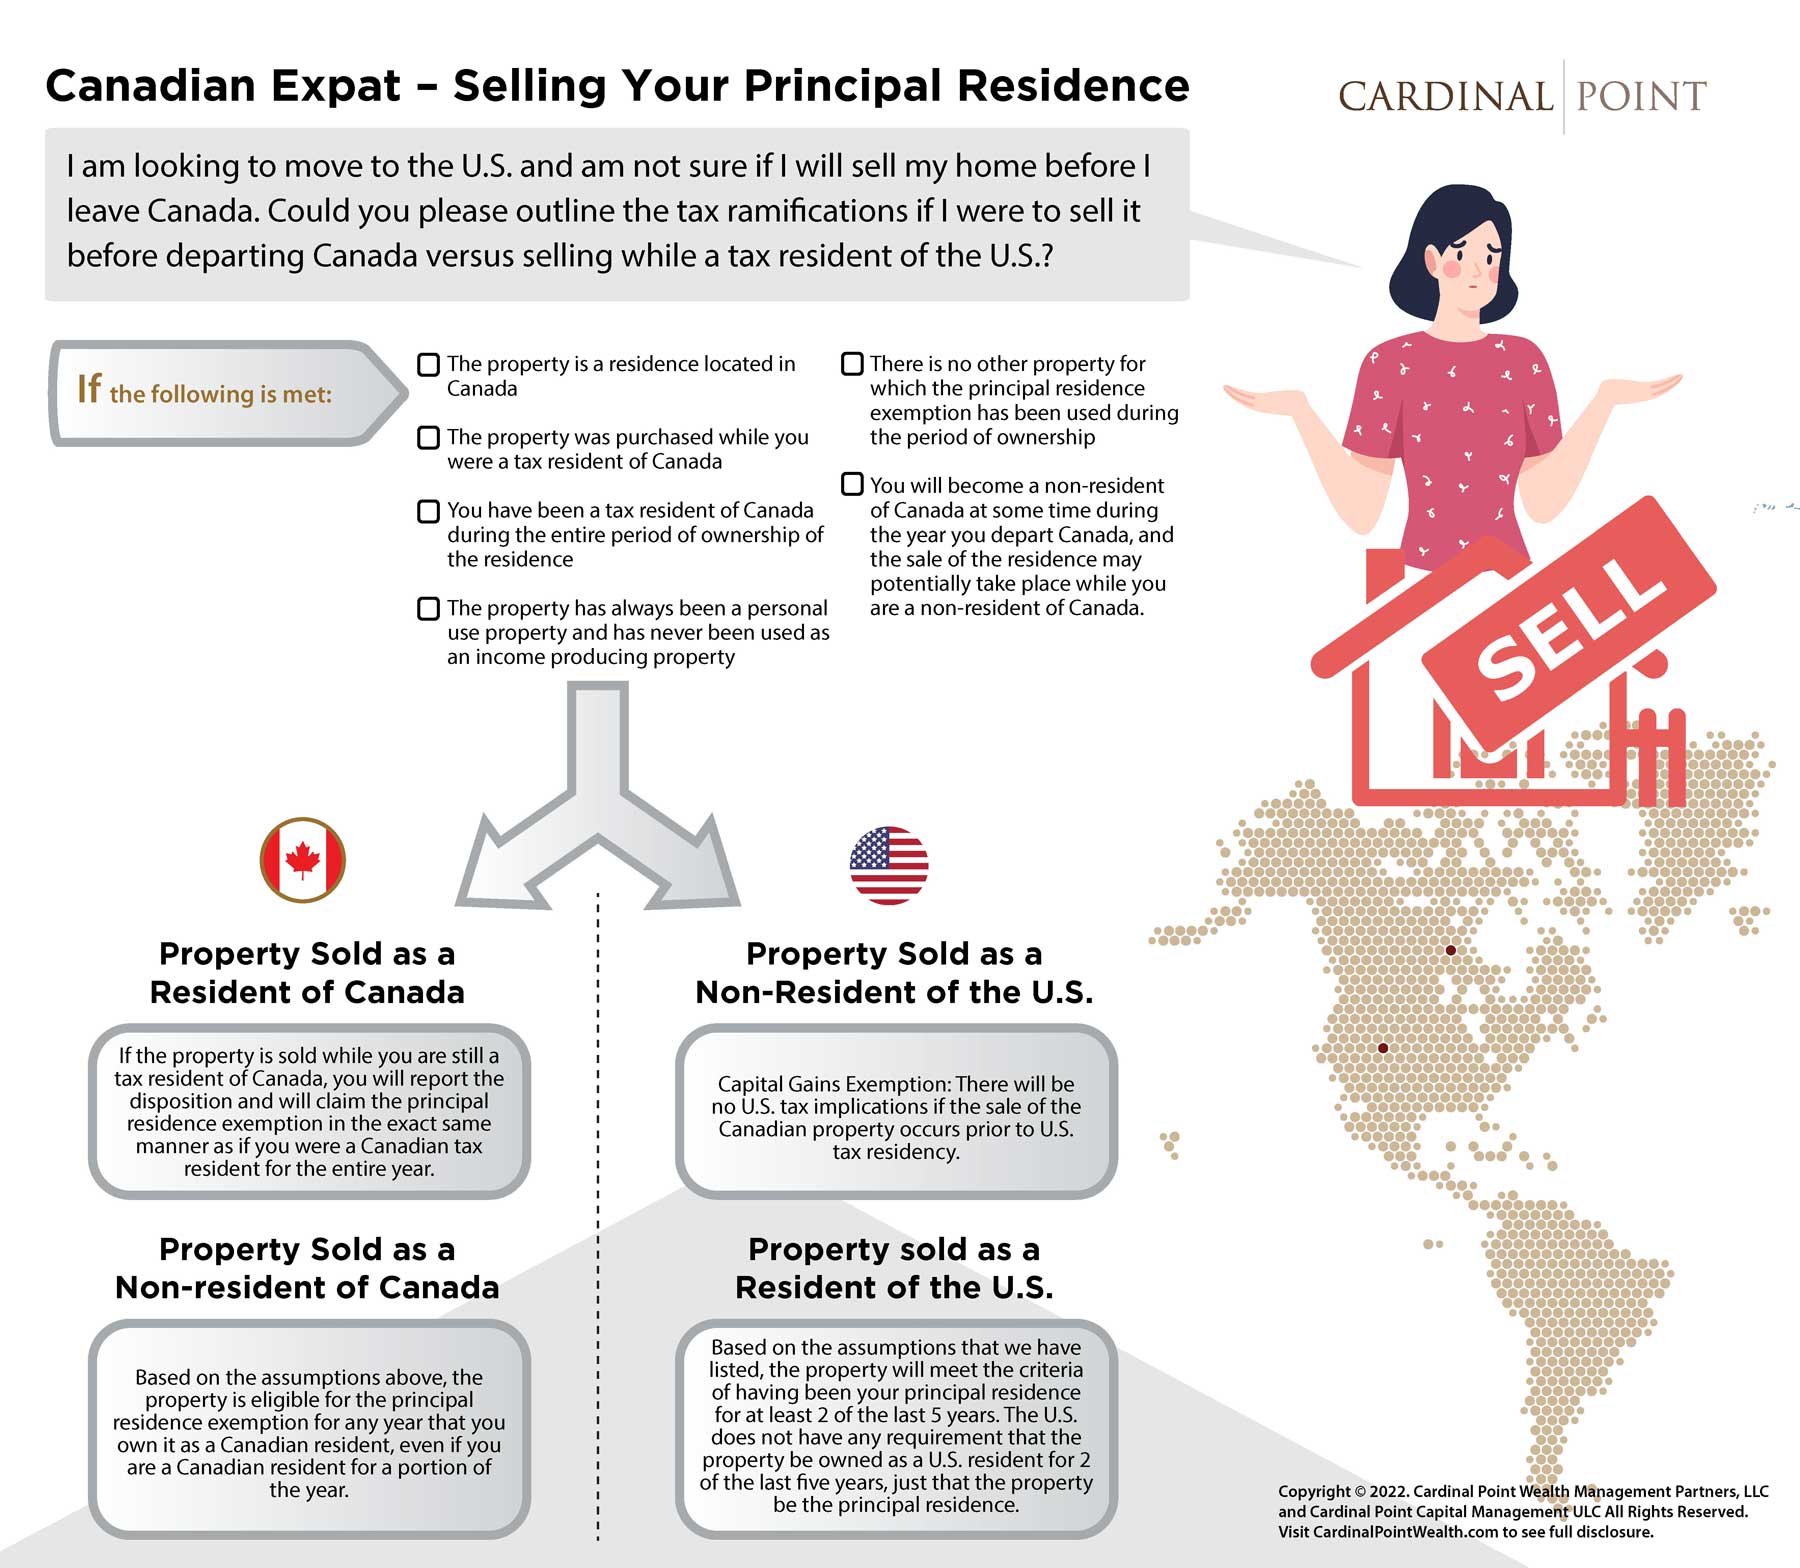 Canadian Expat - Selling Your Principal Residence